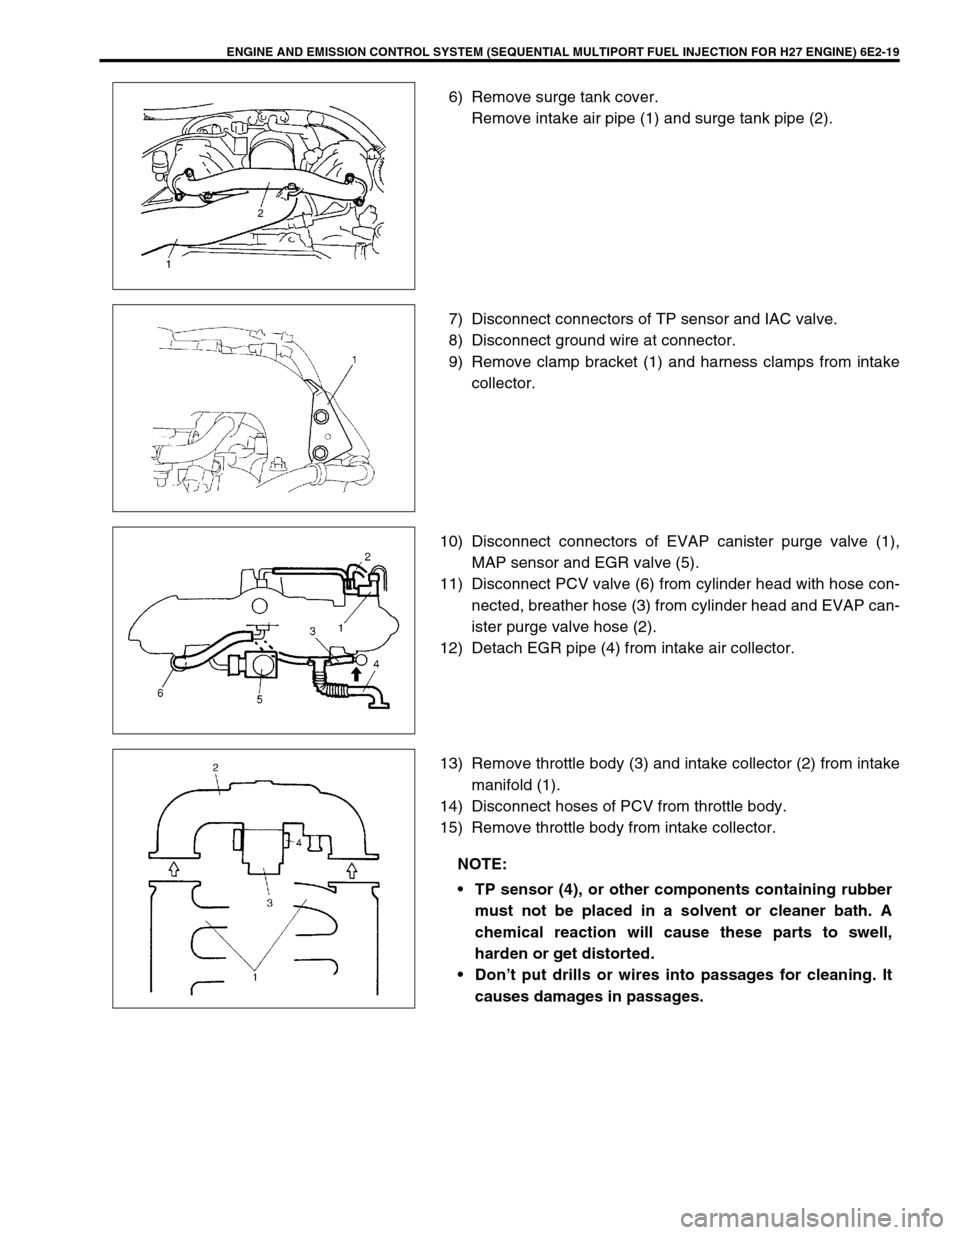 SUZUKI GRAND VITARA 2001 2.G User Guide ENGINE AND EMISSION CONTROL SYSTEM (SEQUENTIAL MULTIPORT FUEL INJECTION FOR H27 ENGINE) 6E2-19
6) Remove surge tank cover.
Remove intake air pipe (1) and surge tank pipe (2).
7) Disconnect connectors 